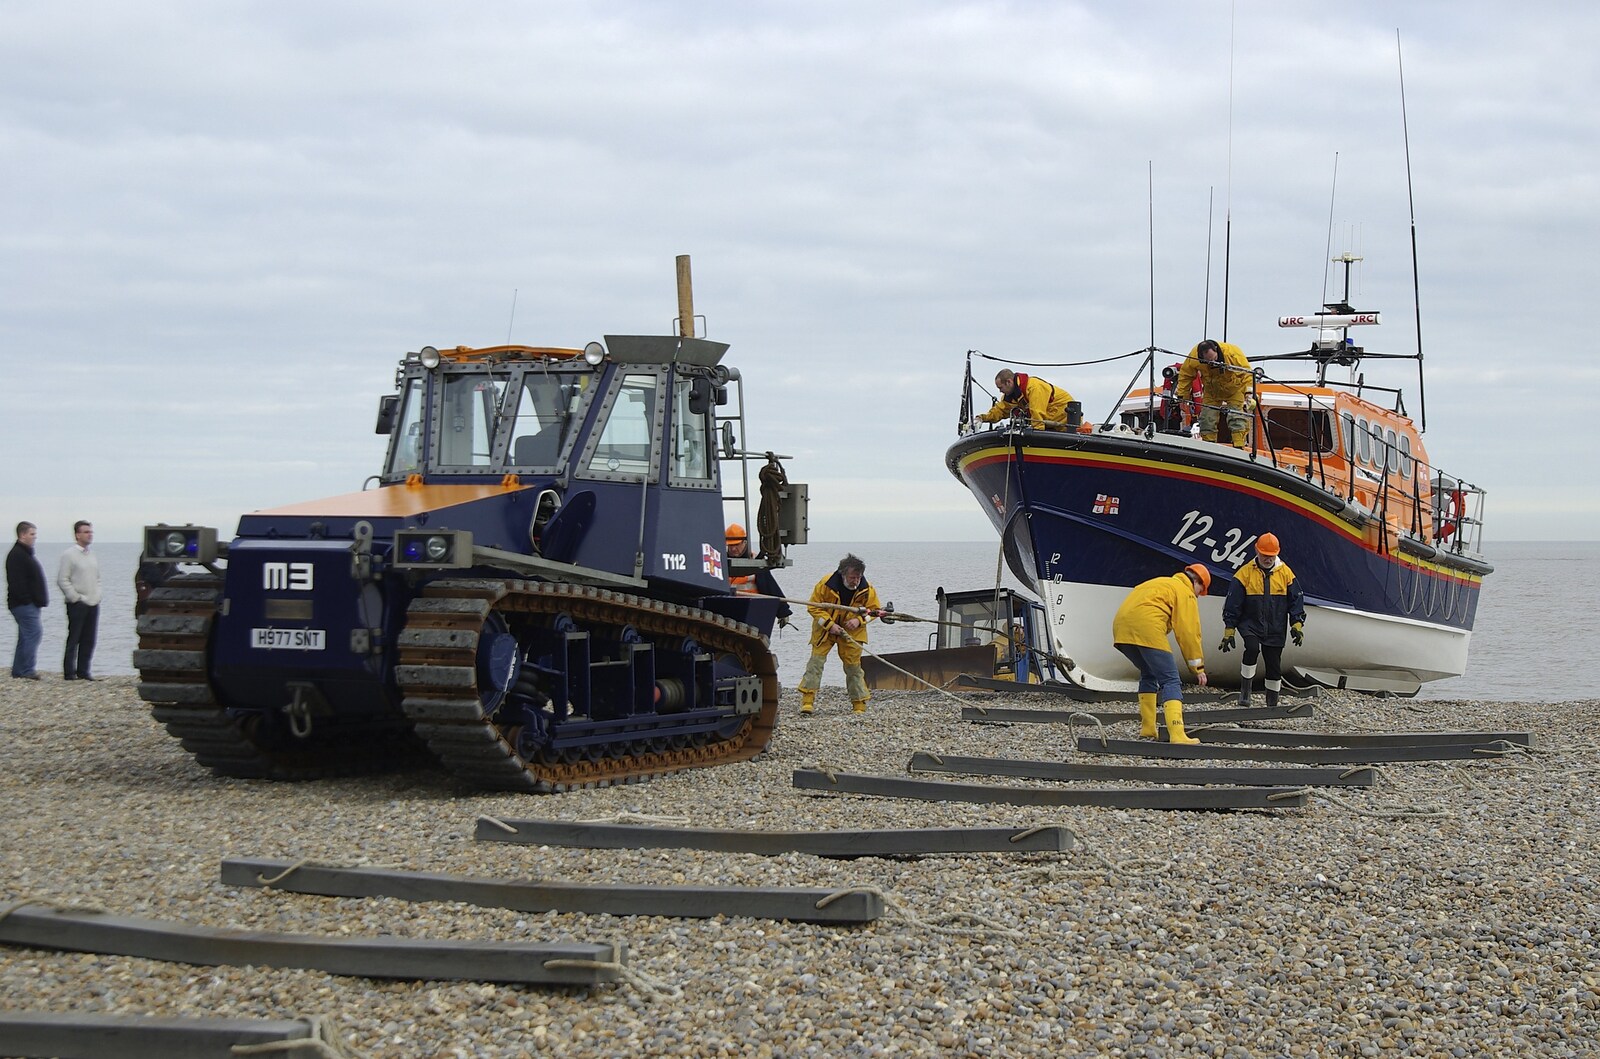 A tractor pulls the lifeboat in from Aldeburgh Lifeboats with The Old Chap, and a Night at Amandines, Diss, Norfolk - 1st March 2009